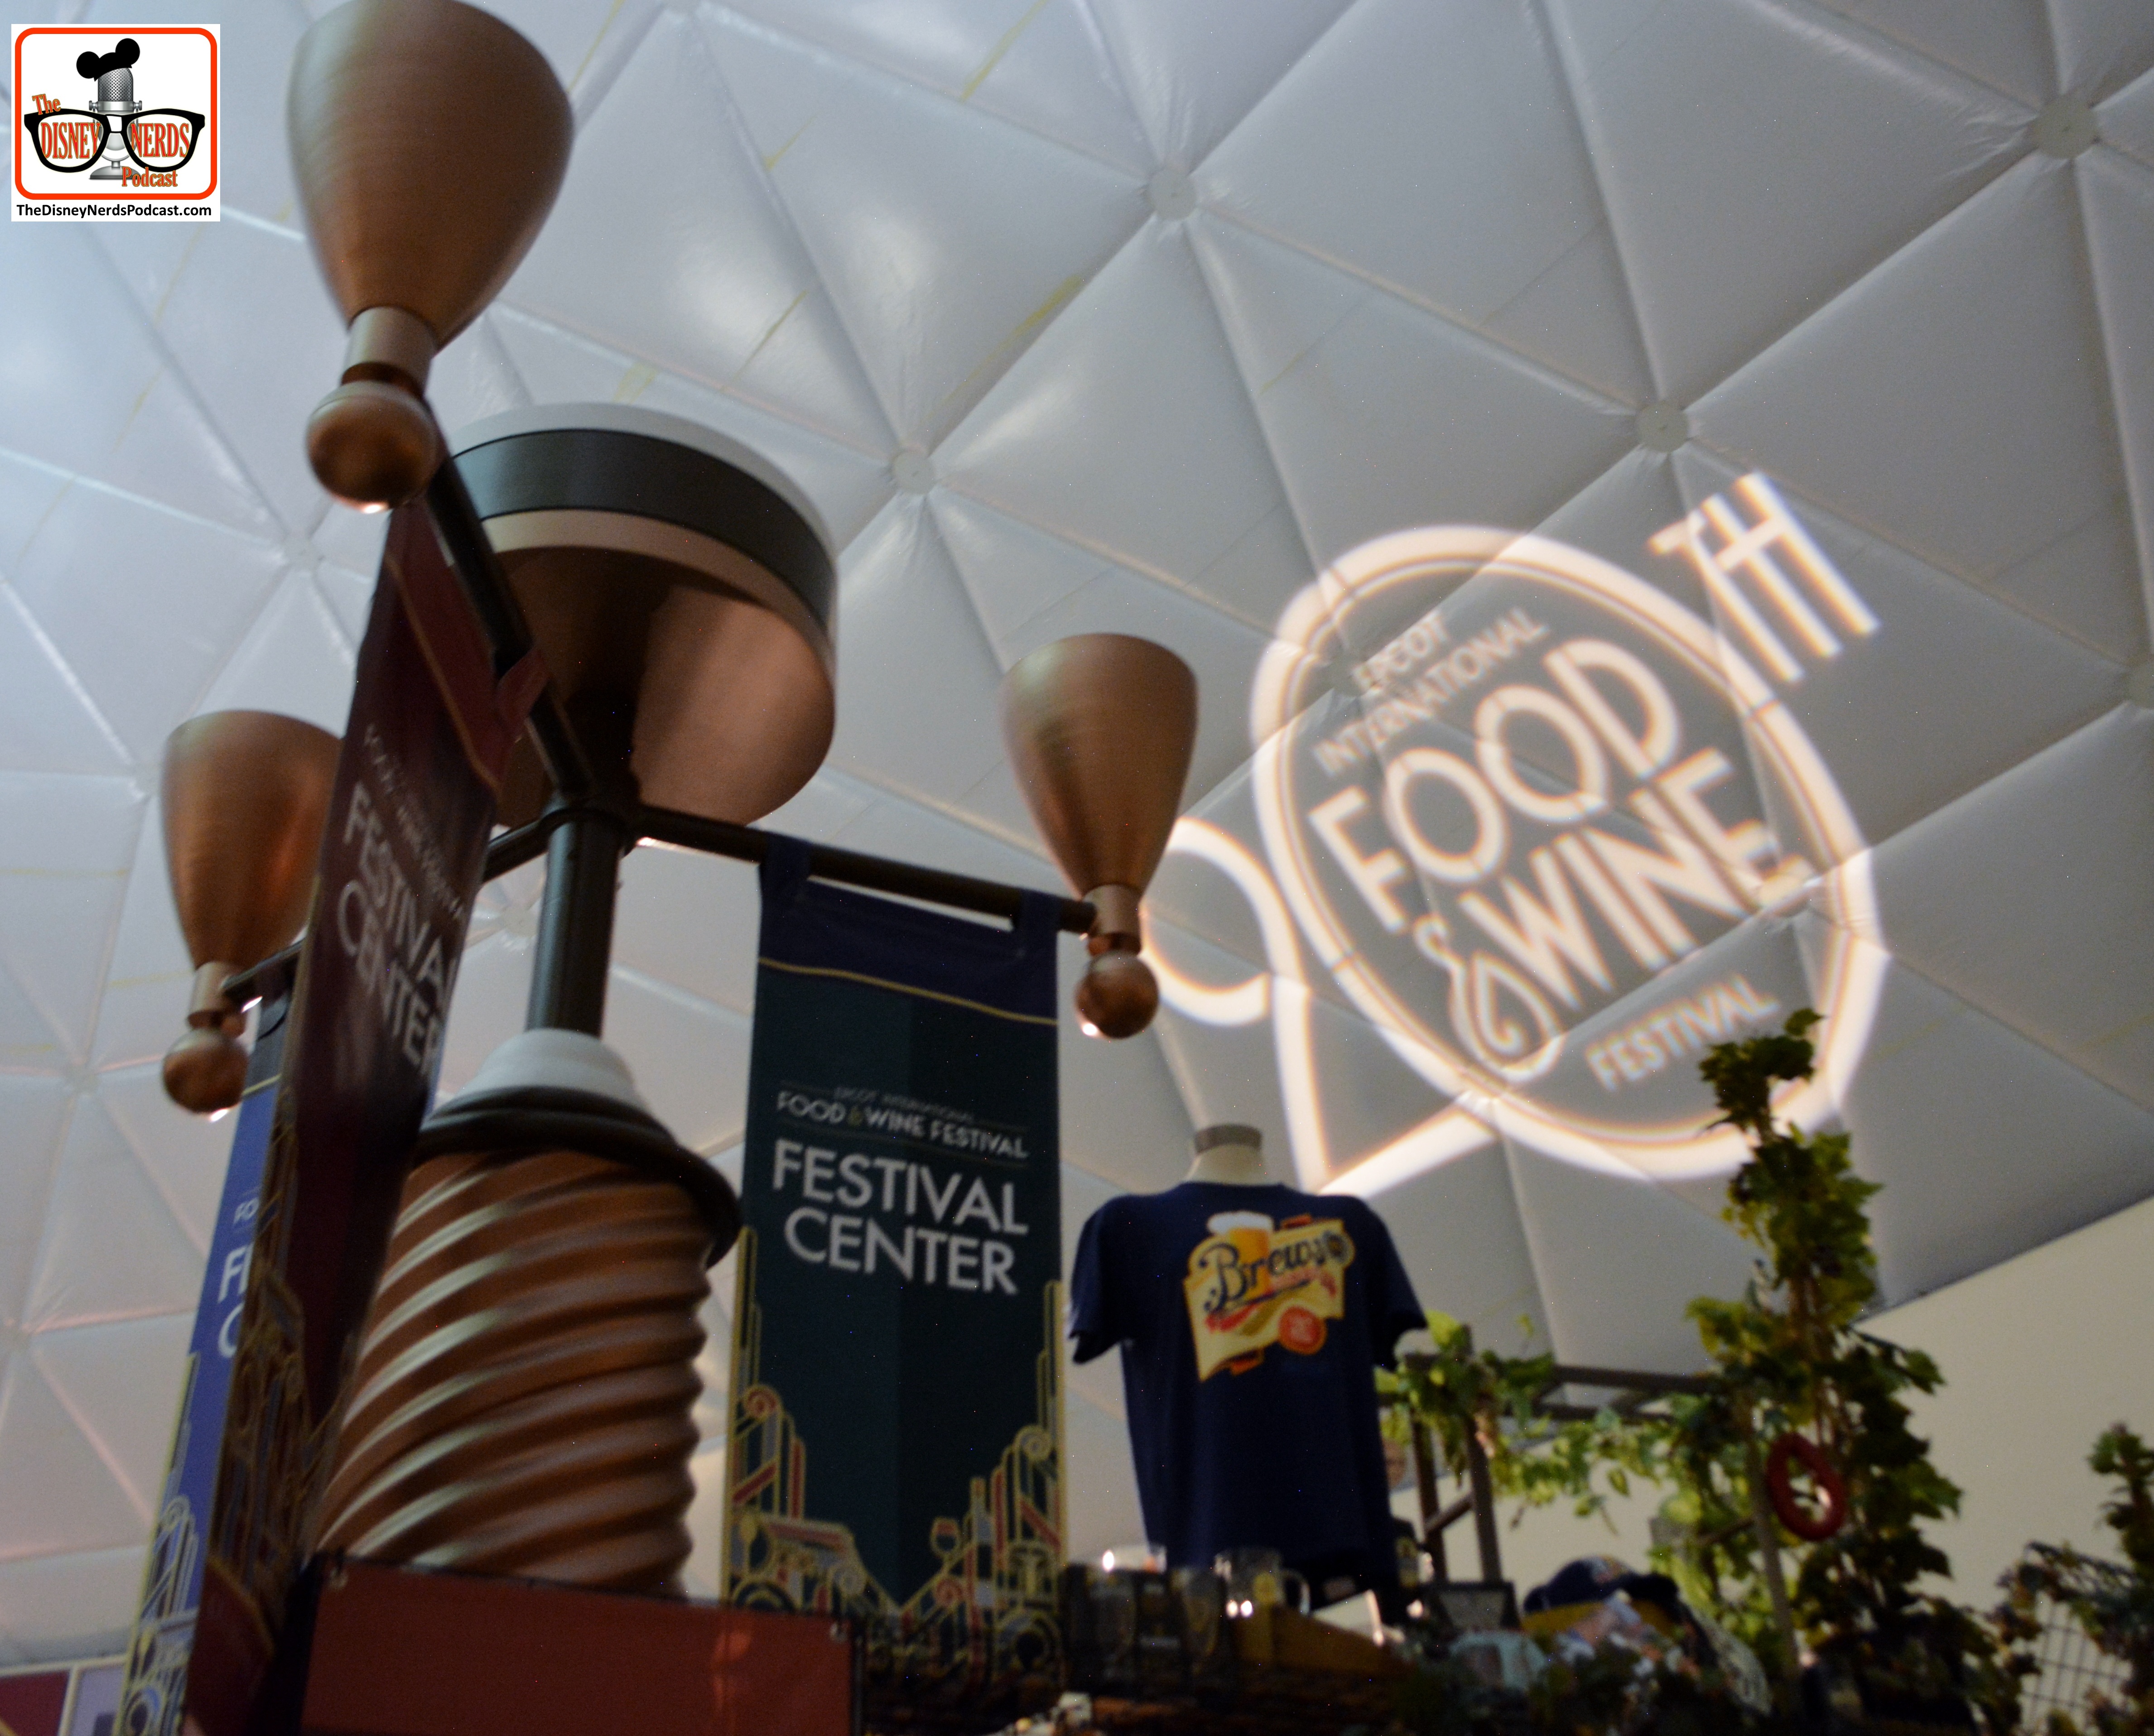 The Festival Center - Epcot 20th Anniversary of the Food and Wine Festival